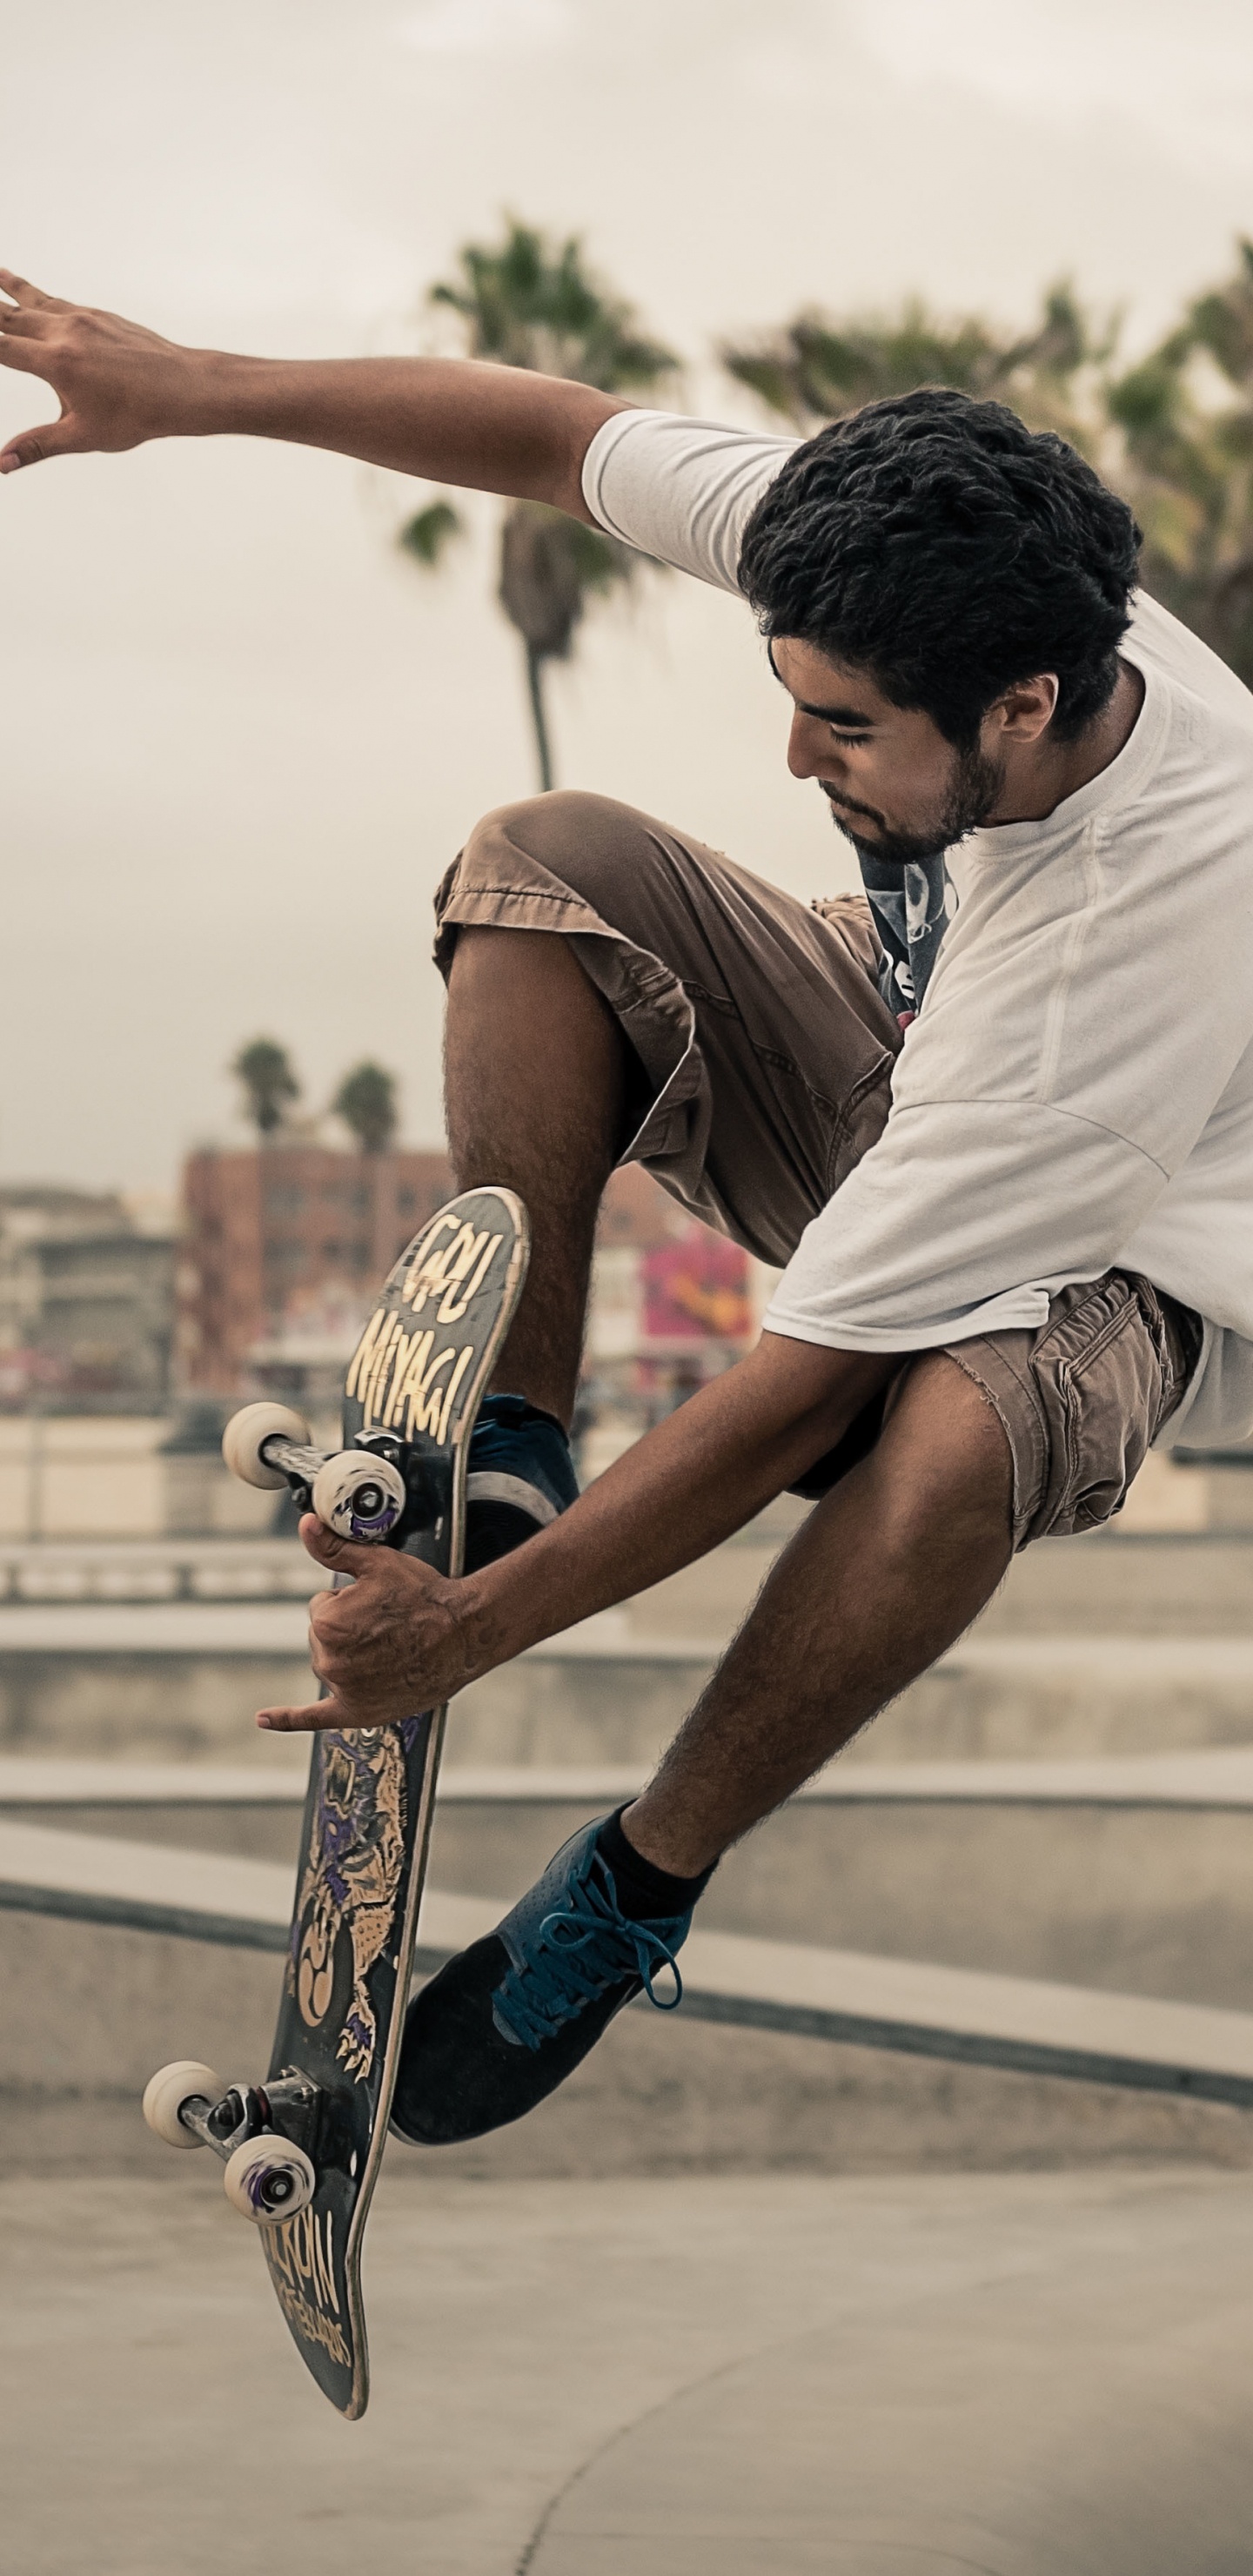 Man in White T-shirt and Brown Shorts Playing Skateboard During Daytime. Wallpaper in 1440x2960 Resolution